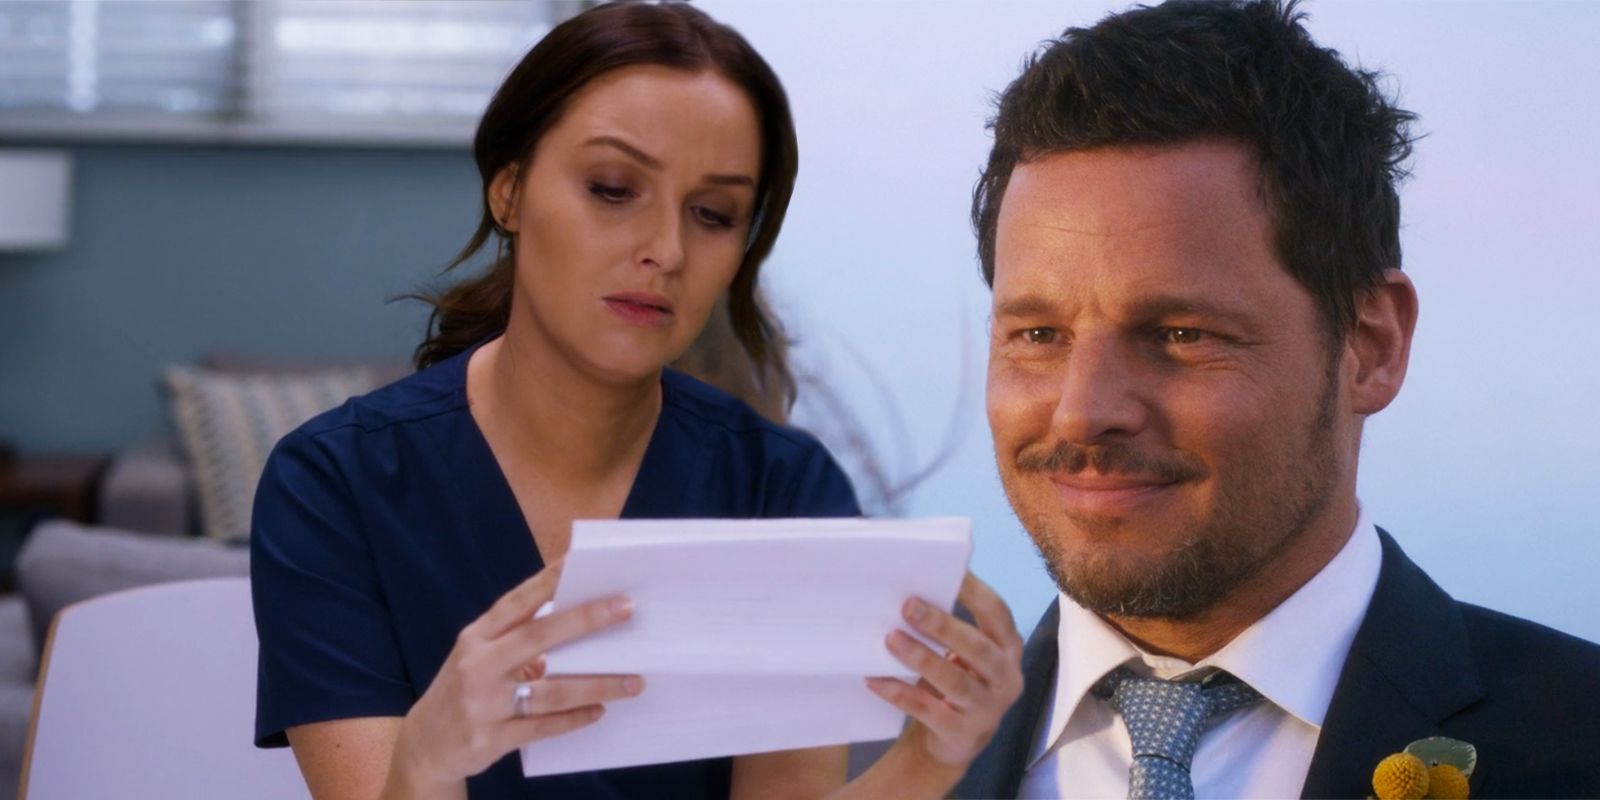 Grey's Anatomy image of Joe reading a letter and Alex smiling in suit